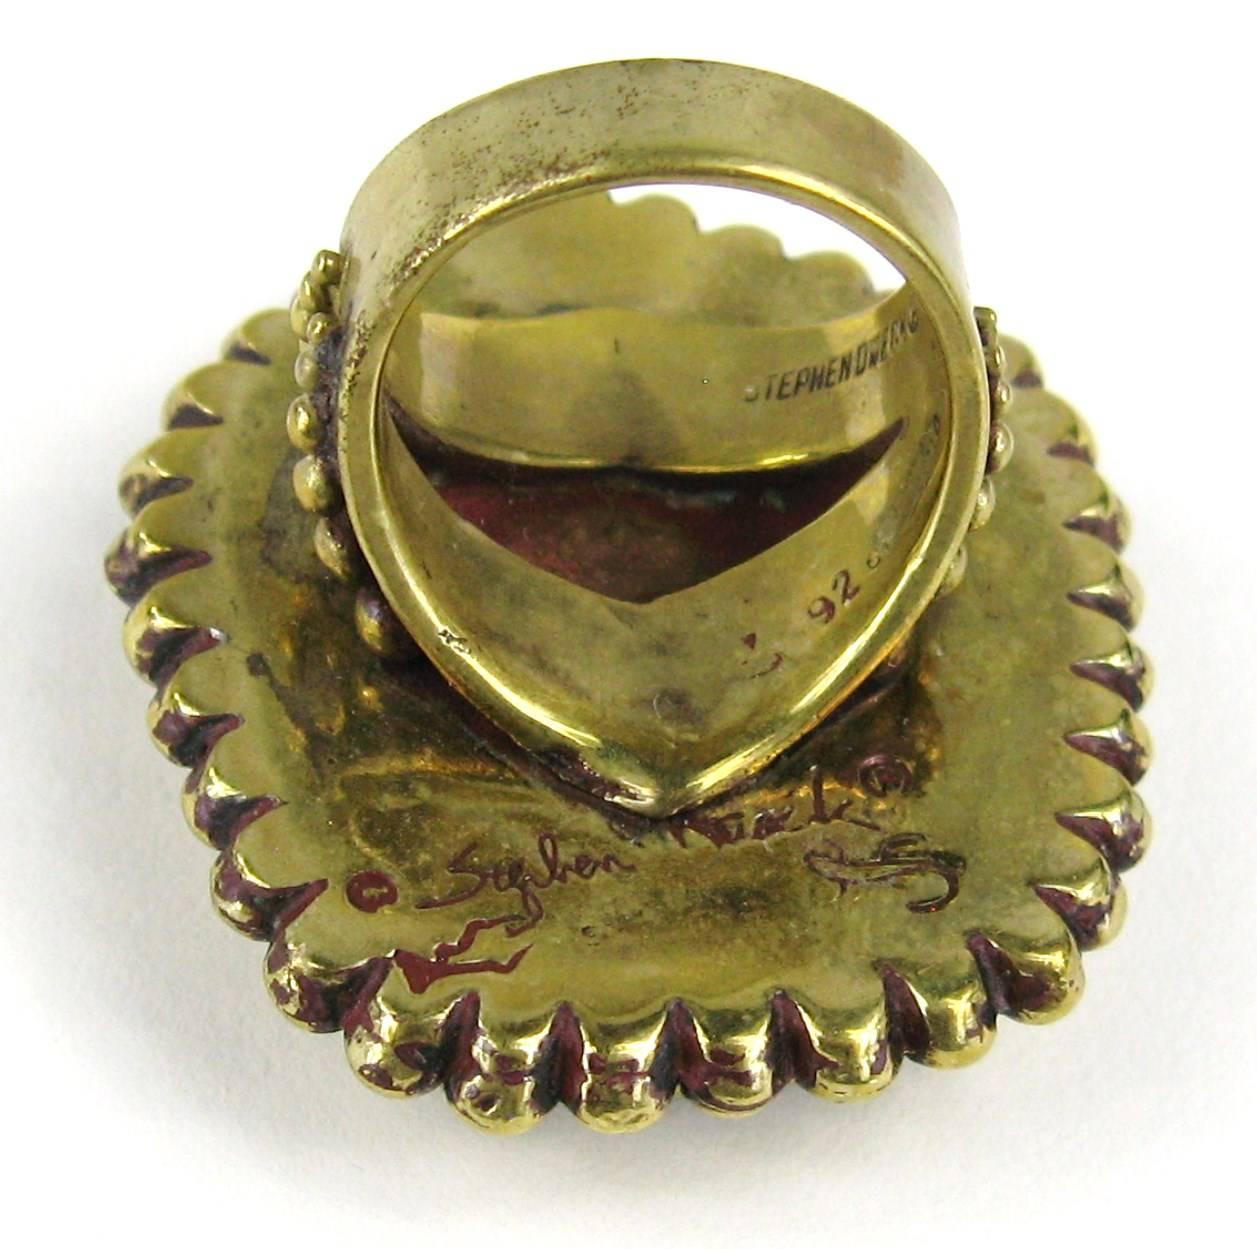 Stephen Dweck Stone Sterling Silver Ring 1992 In Excellent Condition For Sale In Wallkill, NY